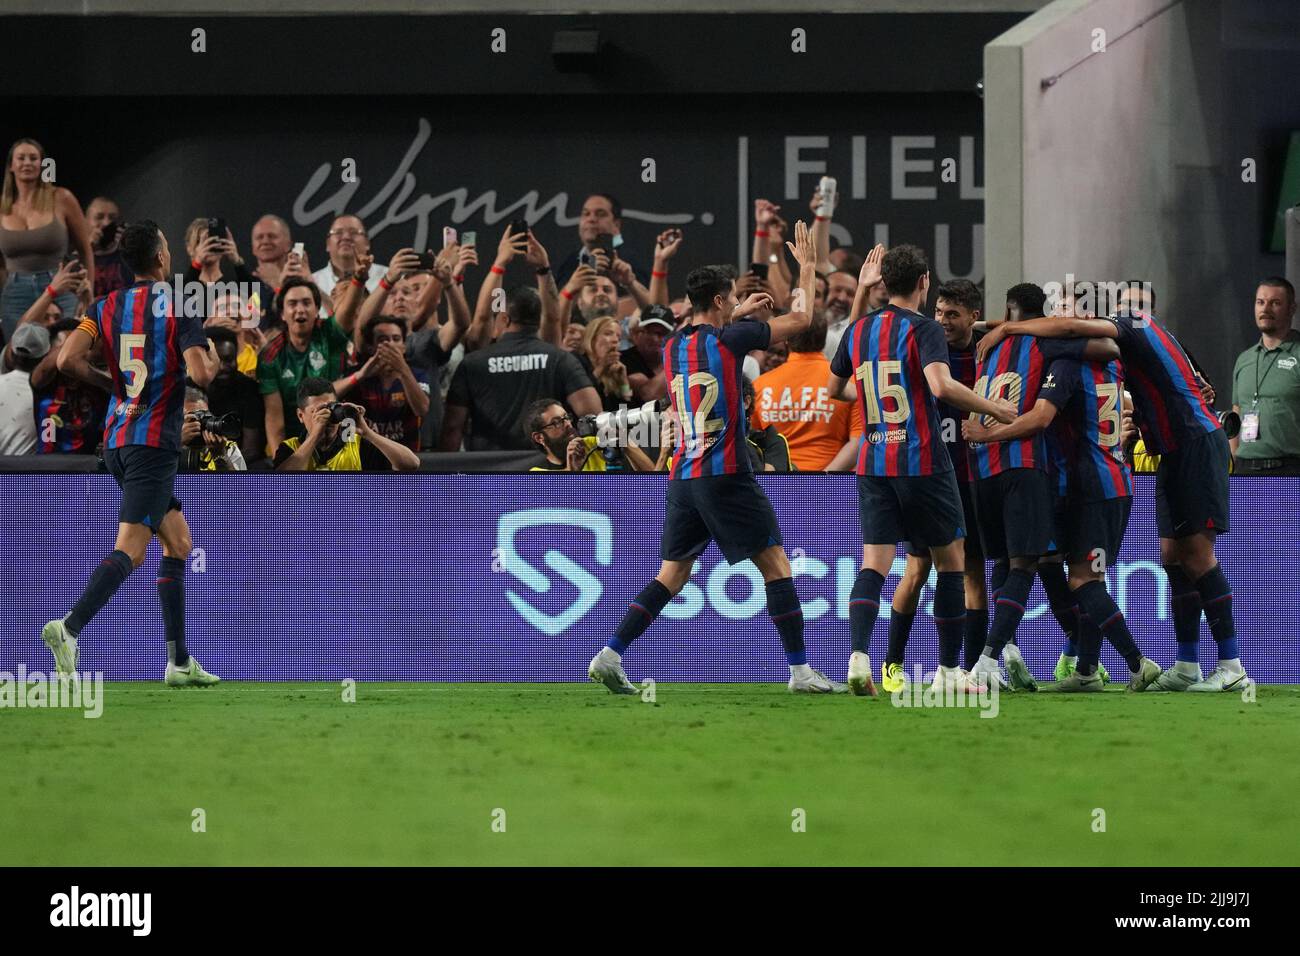 LAS VEGAS, NV - JULY 23: Raphinha of F.C Barcelona and his teammates celebrate after scoring a goal during the Soccer Champions Tour match between Real Madrid and F.C Barcelona at Las Vegas,NV on July 23, 2022 in Las Vegas, USA. (Photo by Louis Grasse/PxImages) Stock Photo